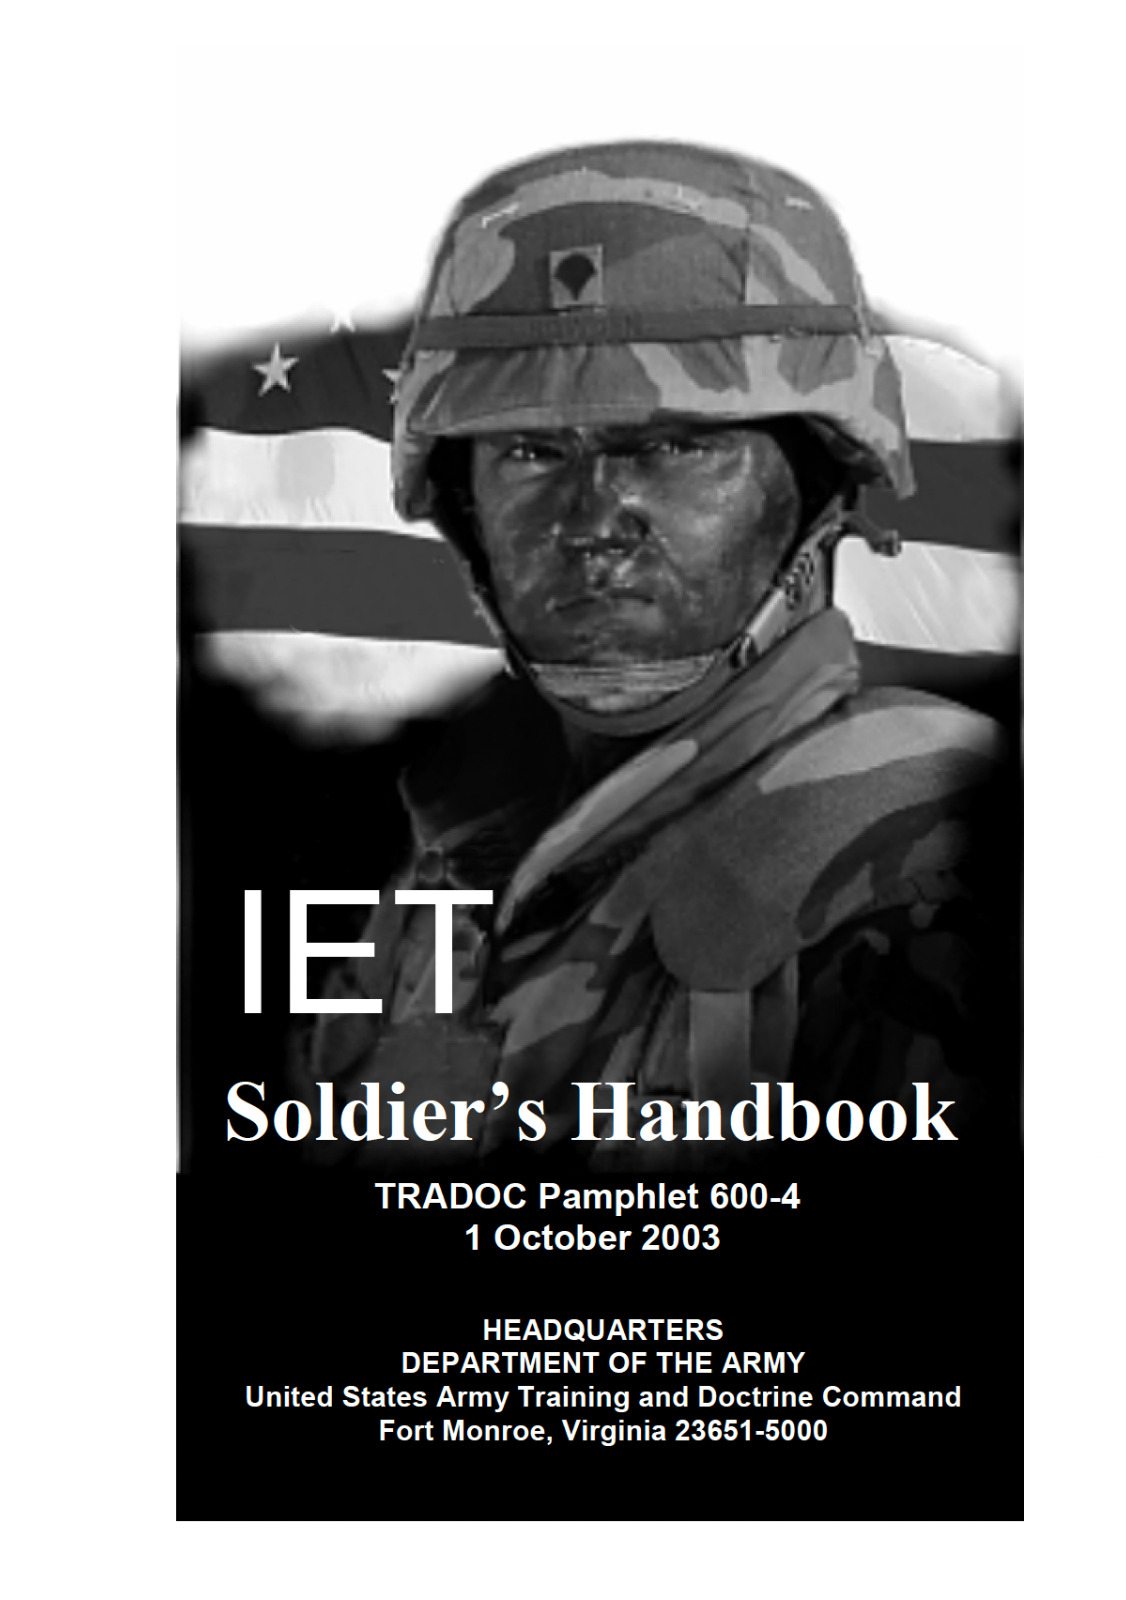 581 Page 2003 IET BASIC TRAINING SOLDIER'S MANUAL ARMY TESTING SMART on Data CD